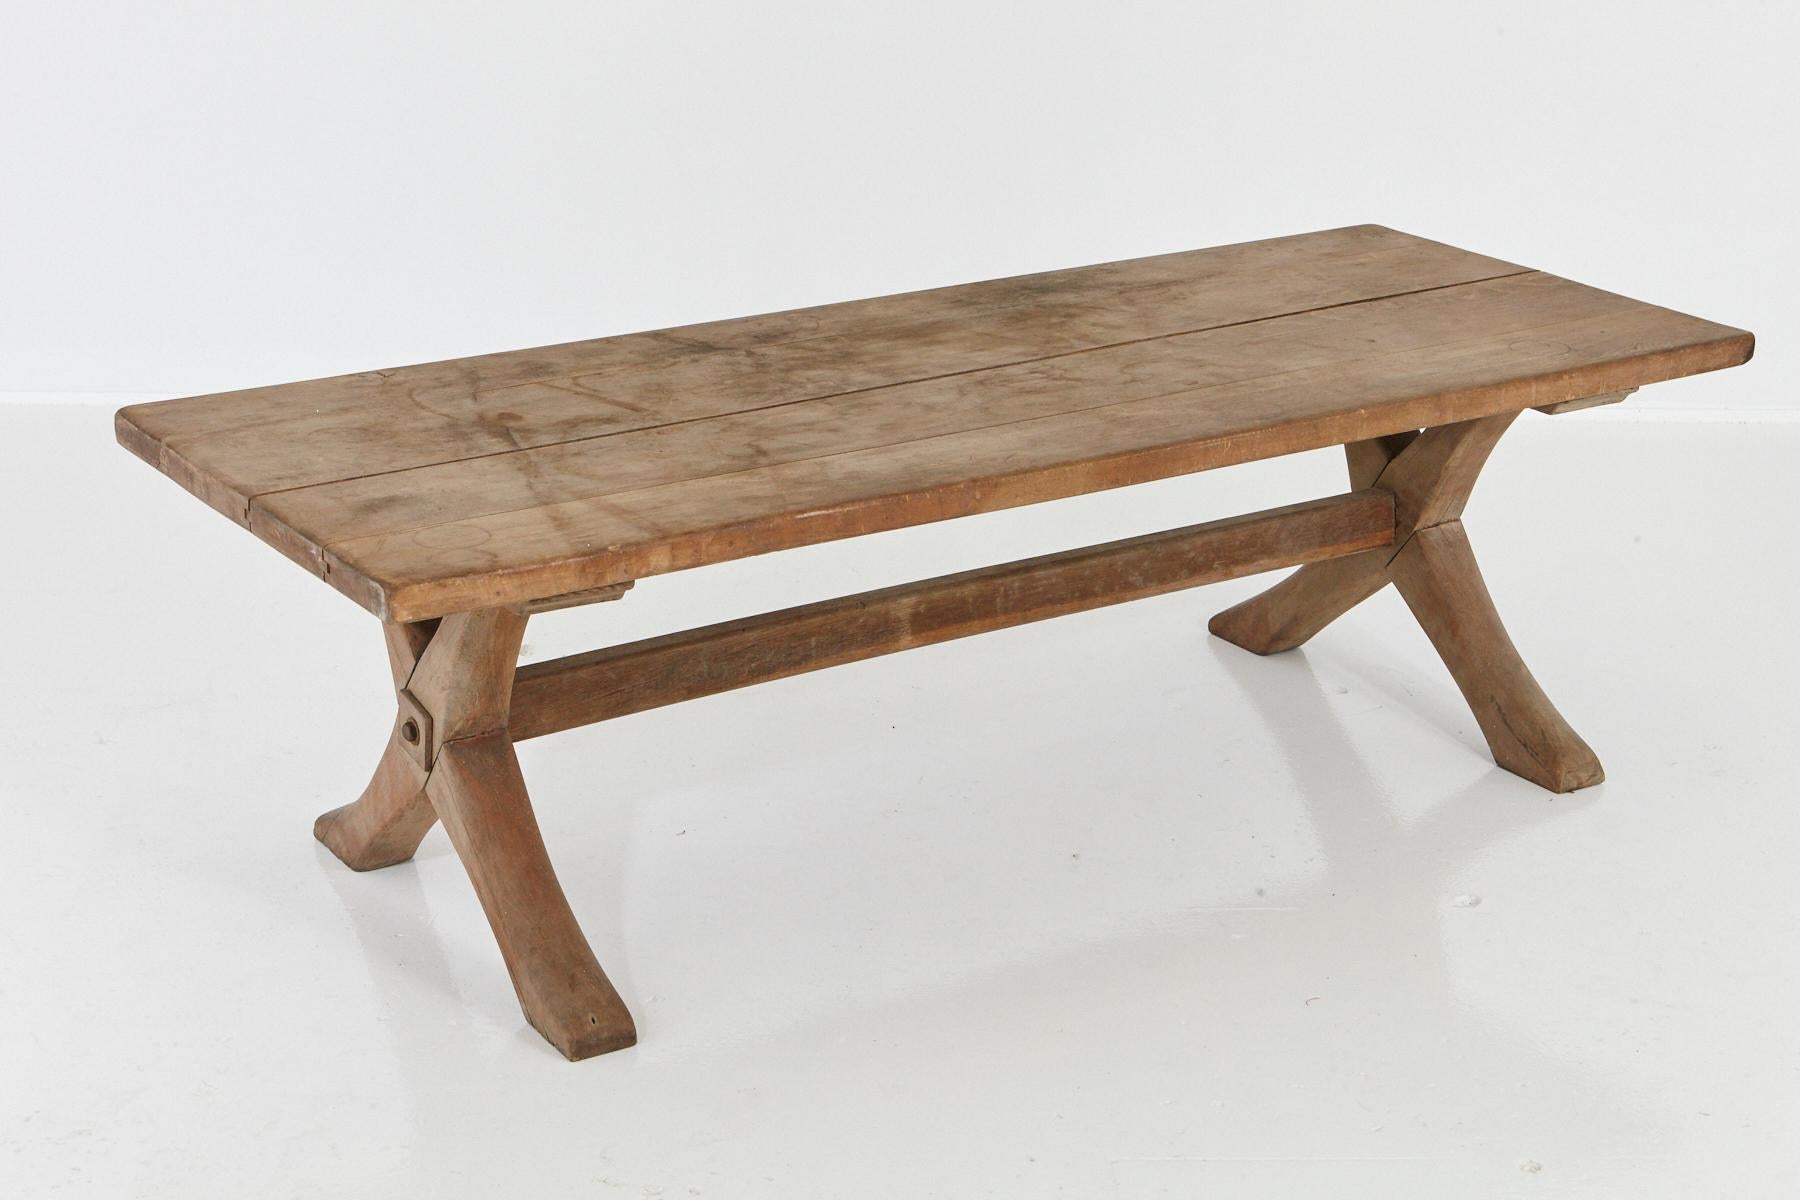 Rustic farmhouse / country style rectangular oak cocktail table with X shape legs and cross support. Solid, sturdy table with some stains on the top, nice patina.